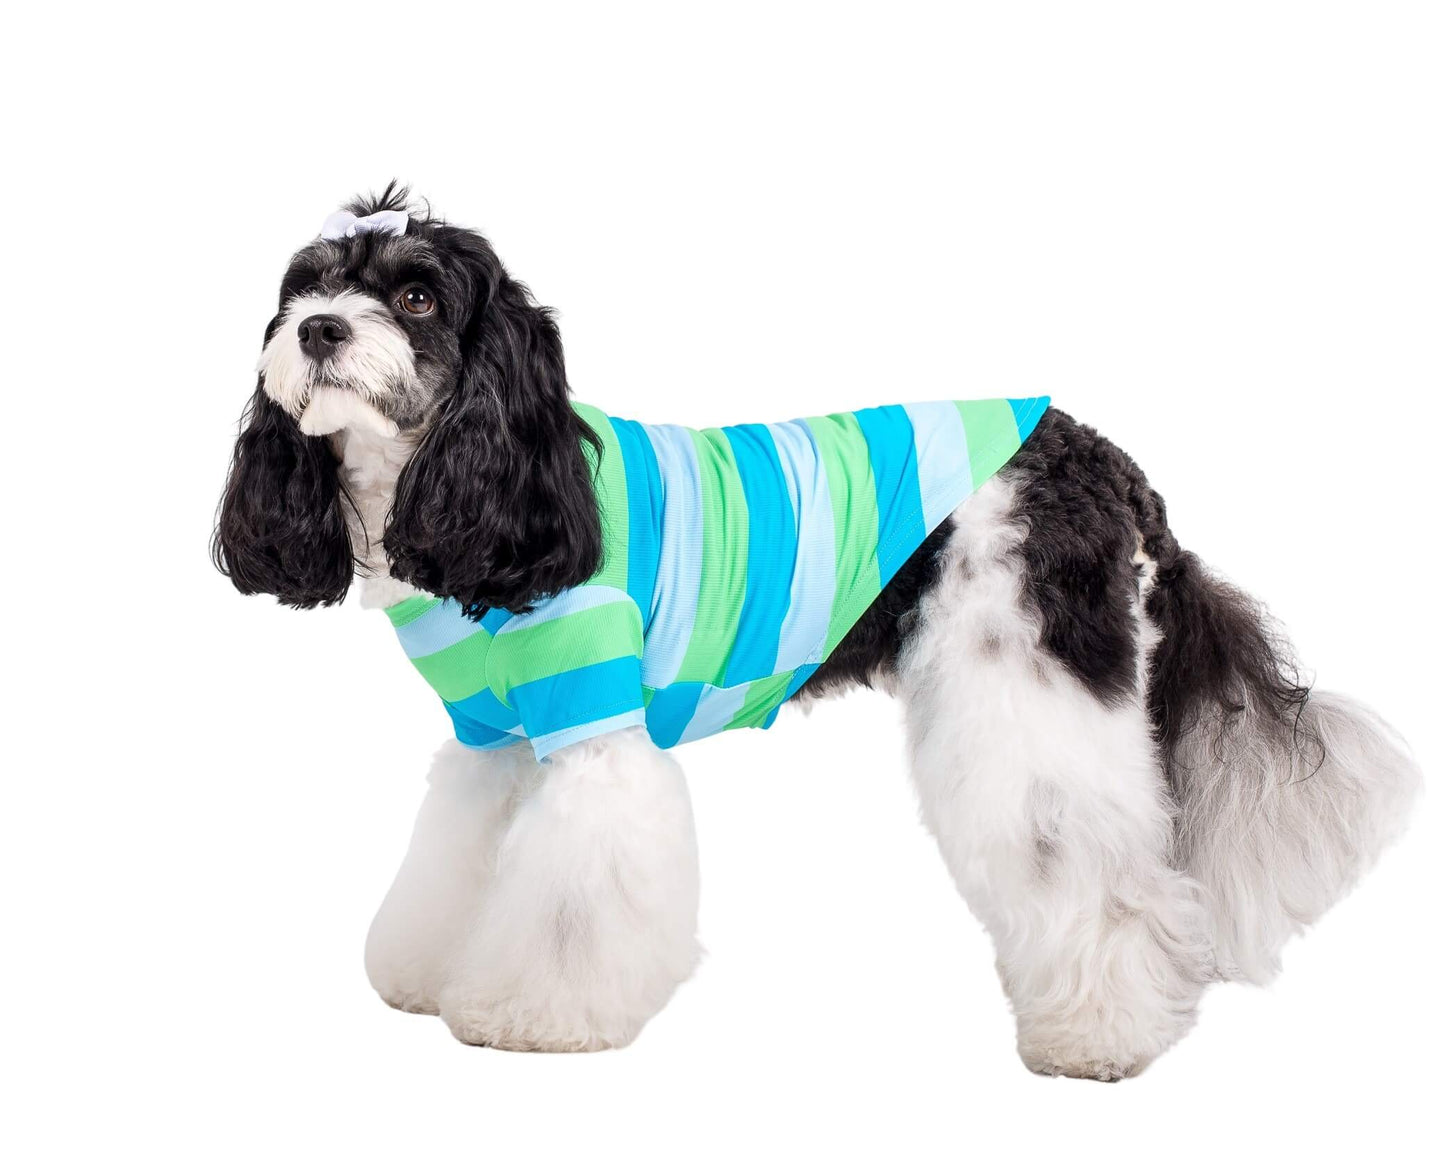 A black and white cavoodle wearing Vibrant Hounds Seriously Stripey cooling tee. The tee is blue and green thick stripes.